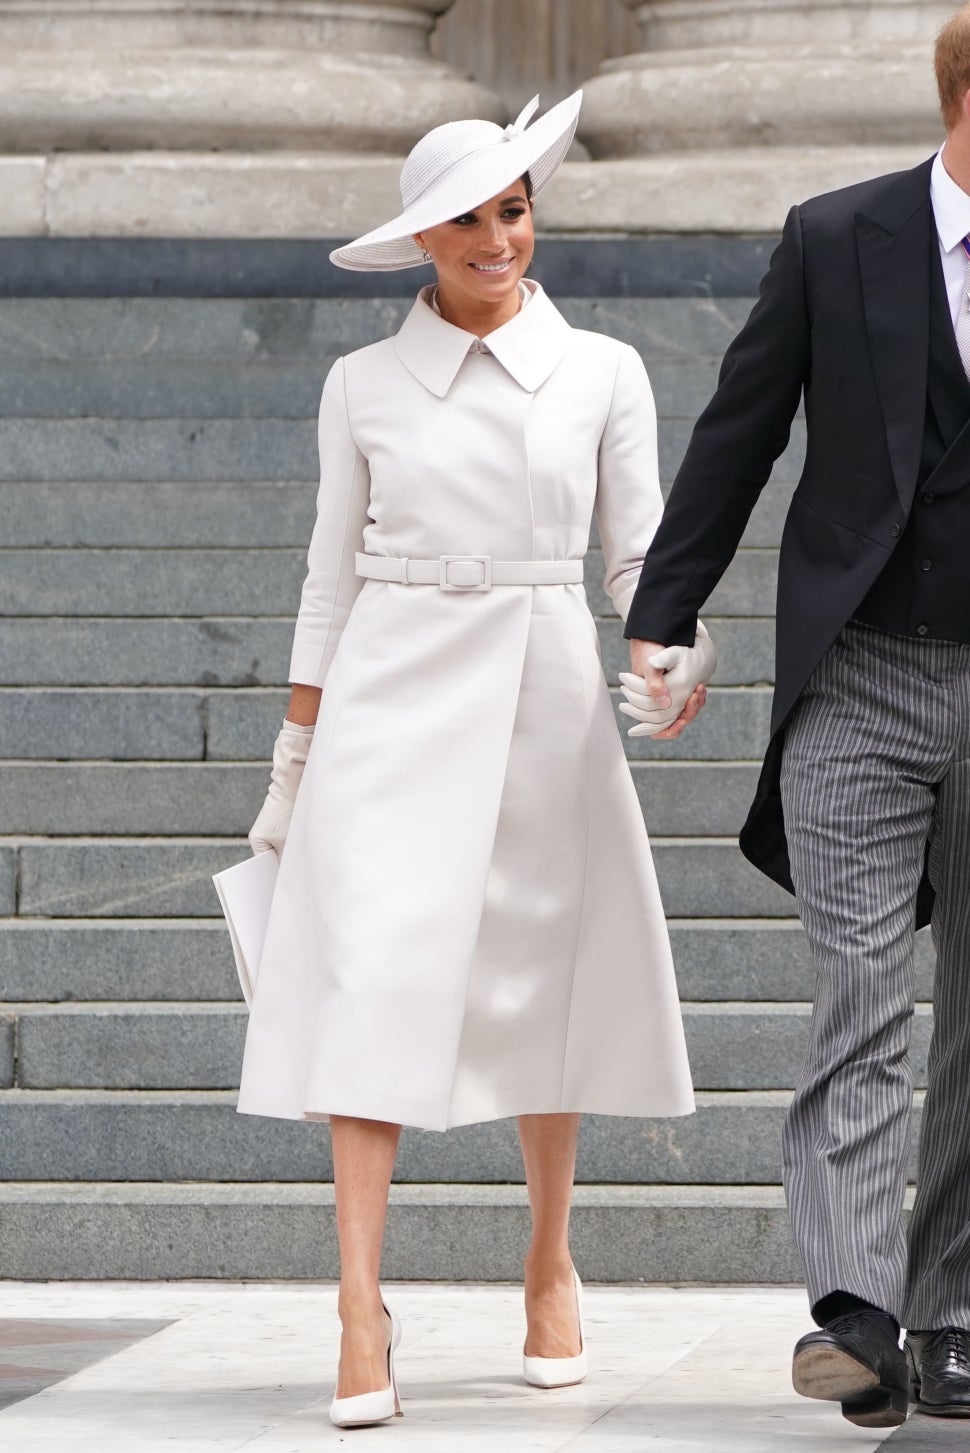 Meghan Markle and Prince Harry at Platinum Jubilee Thanksgiving Service